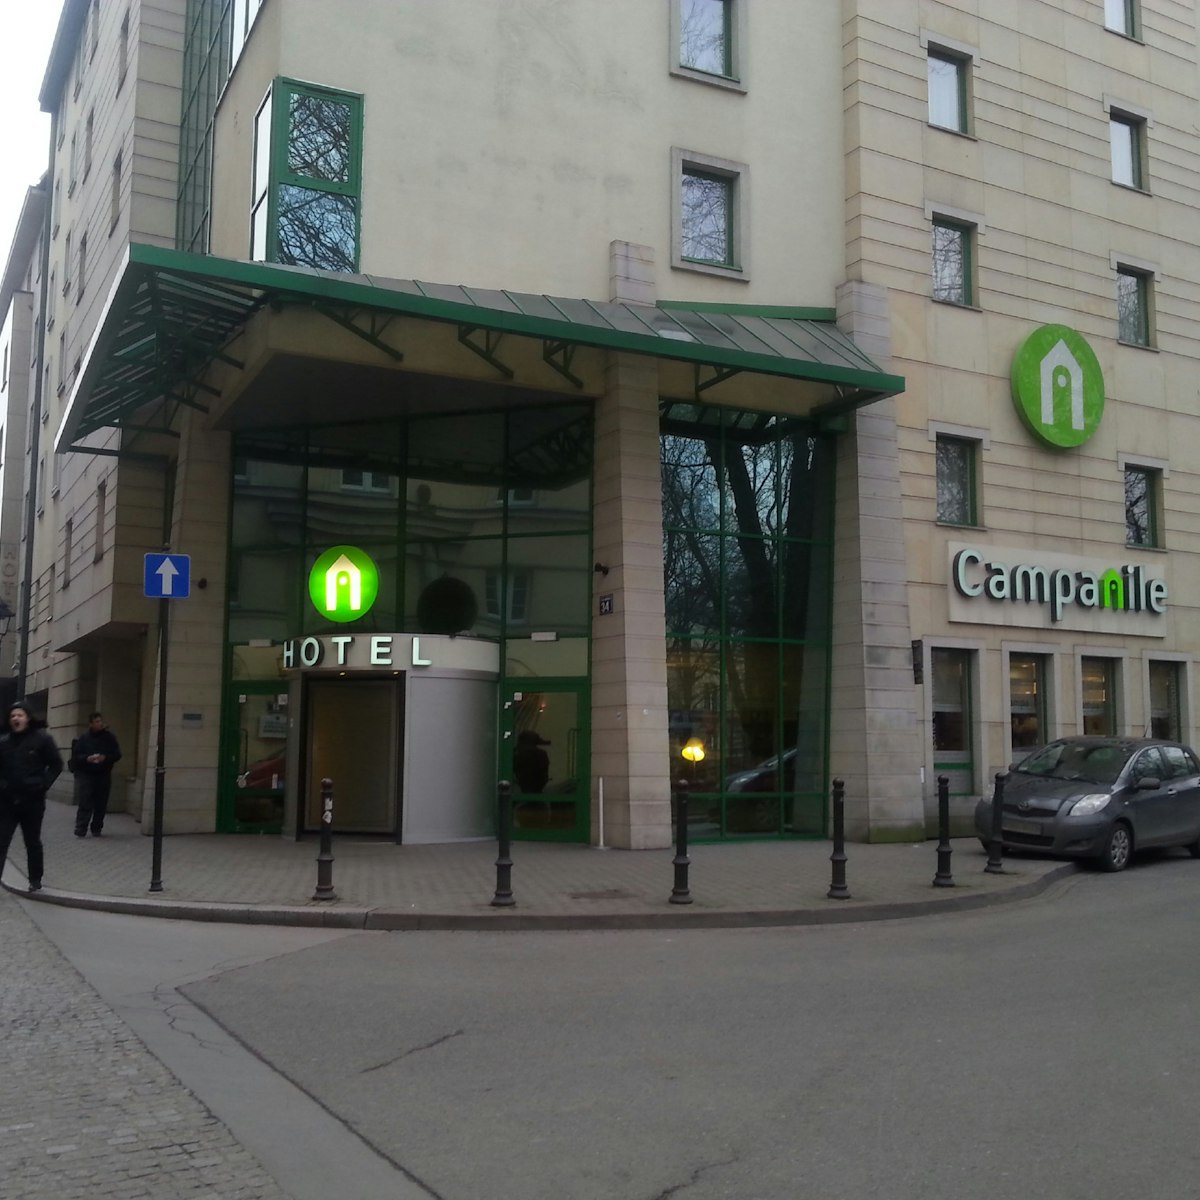 Hotel Campaline, the hotel has a modern exterior which makes it easy to find.